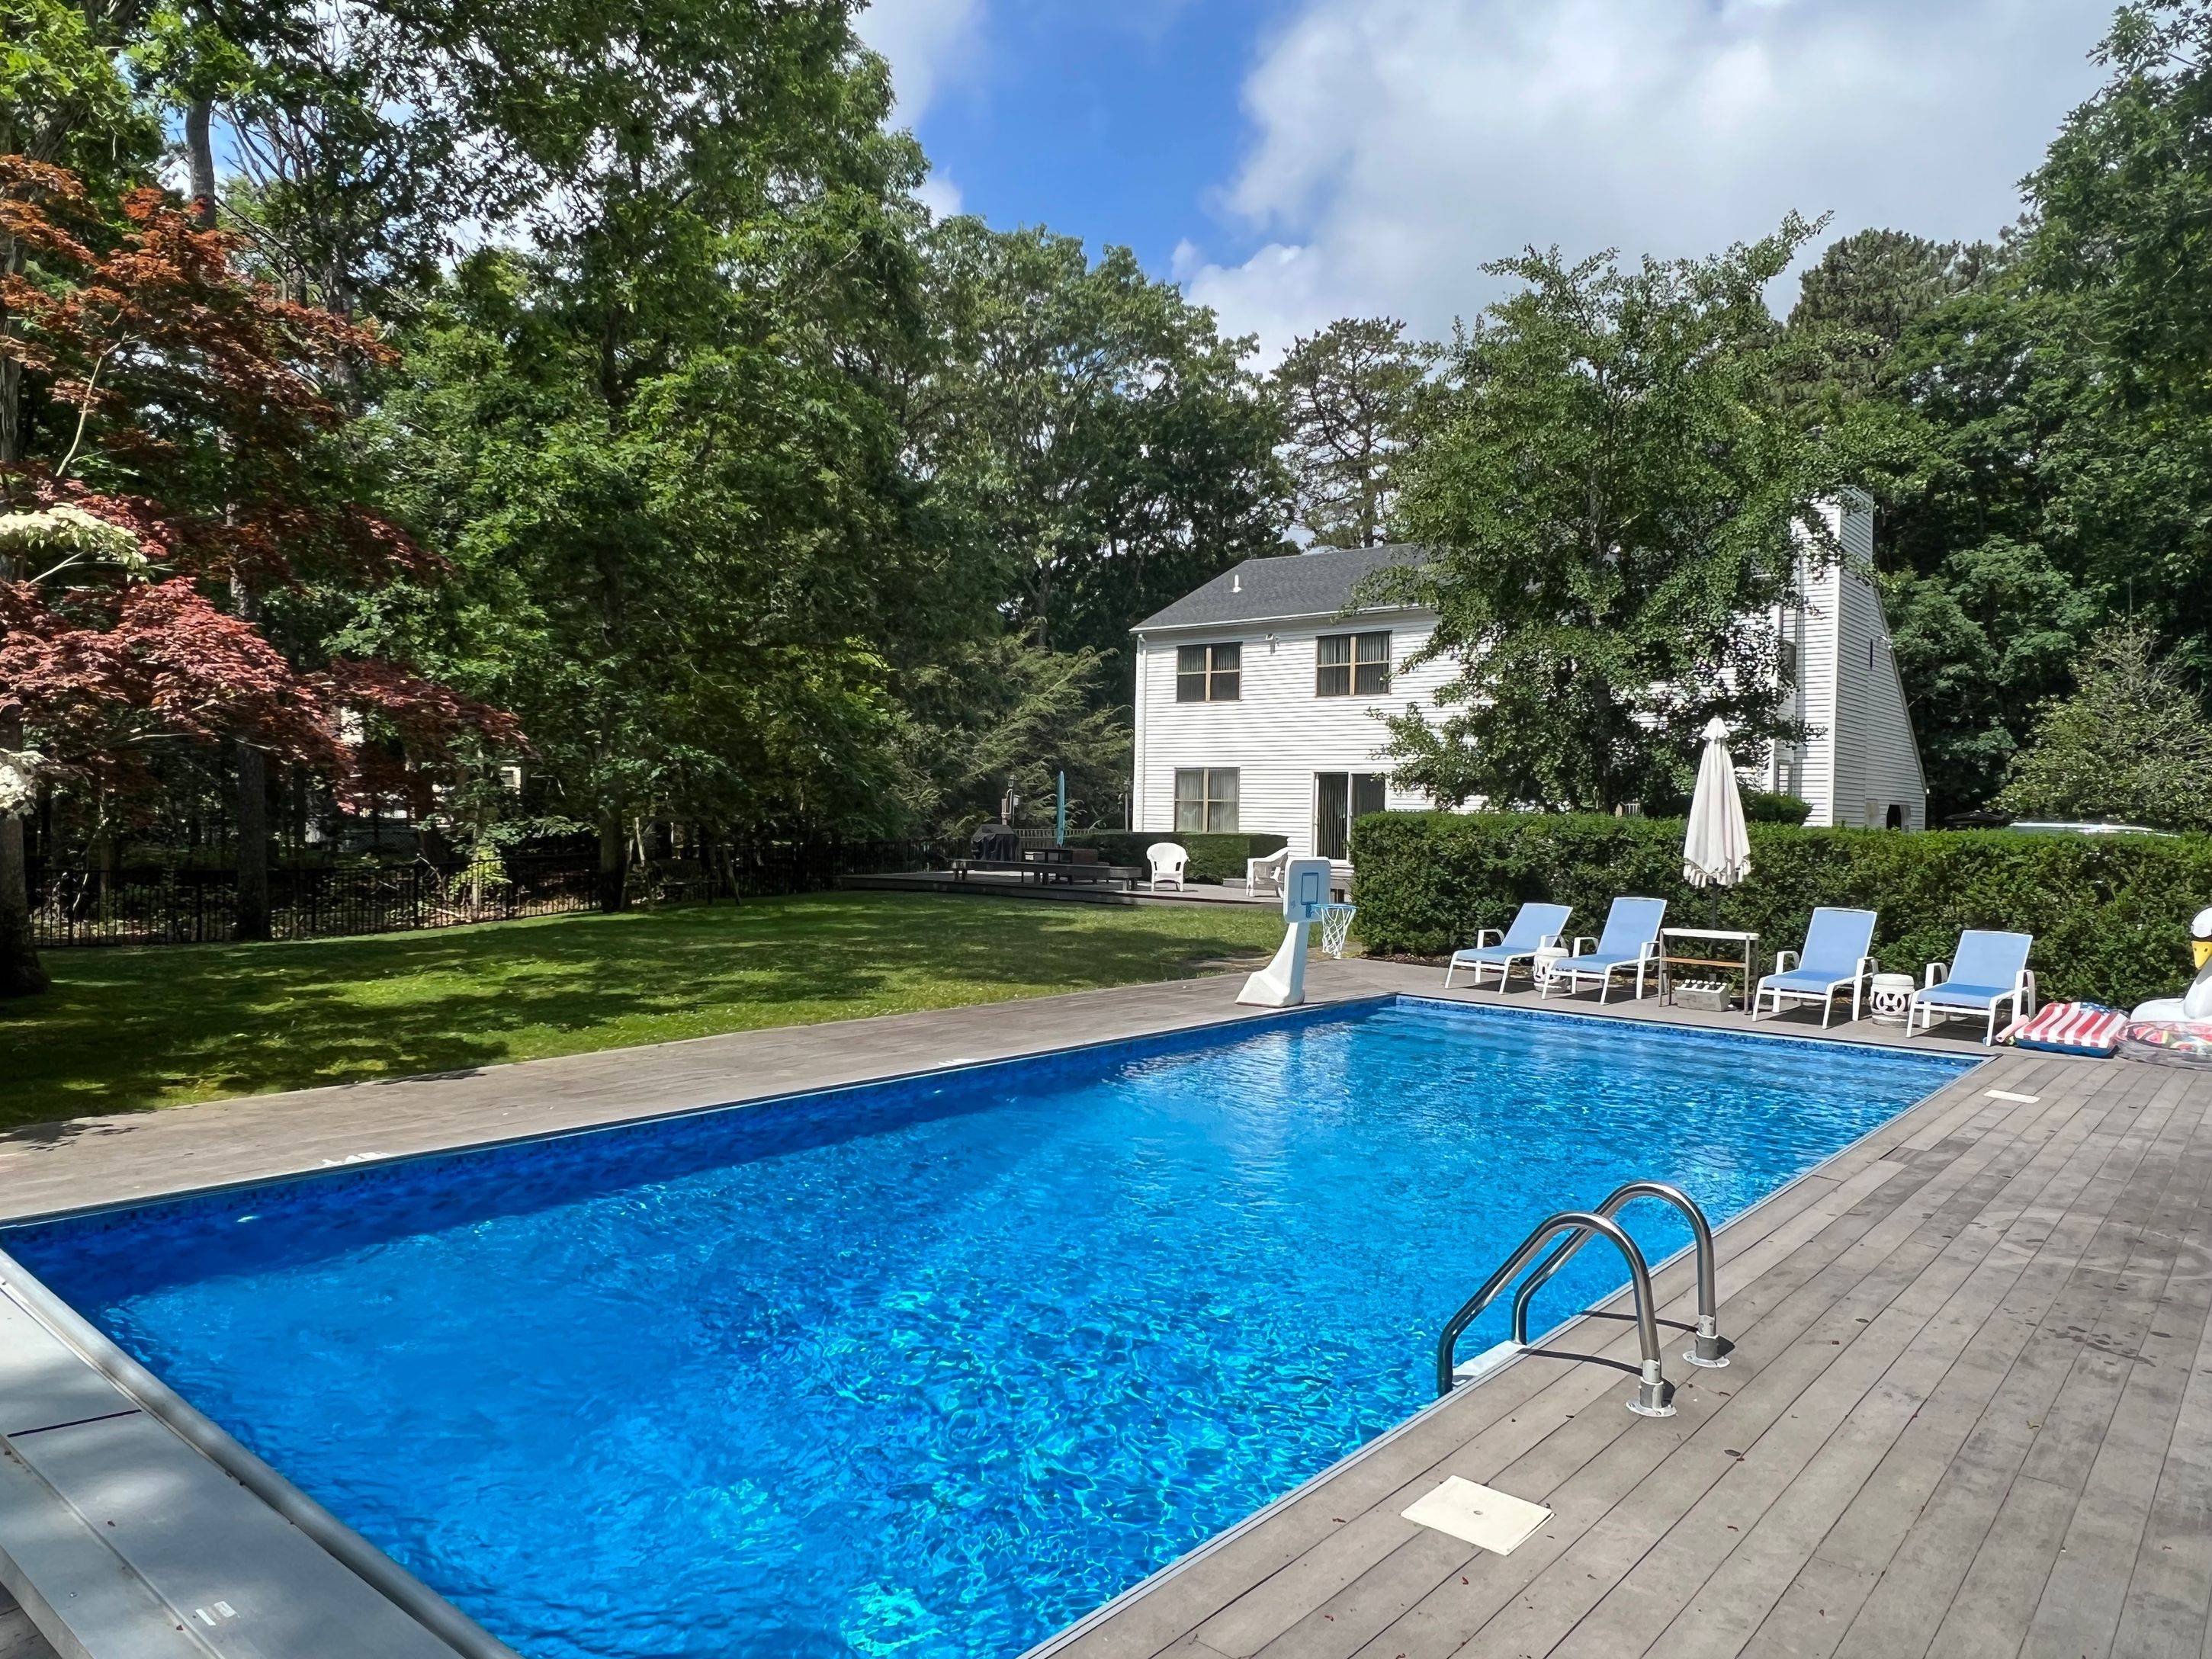 Beautiful Summer Rental With Heated Pool and Private Backyard